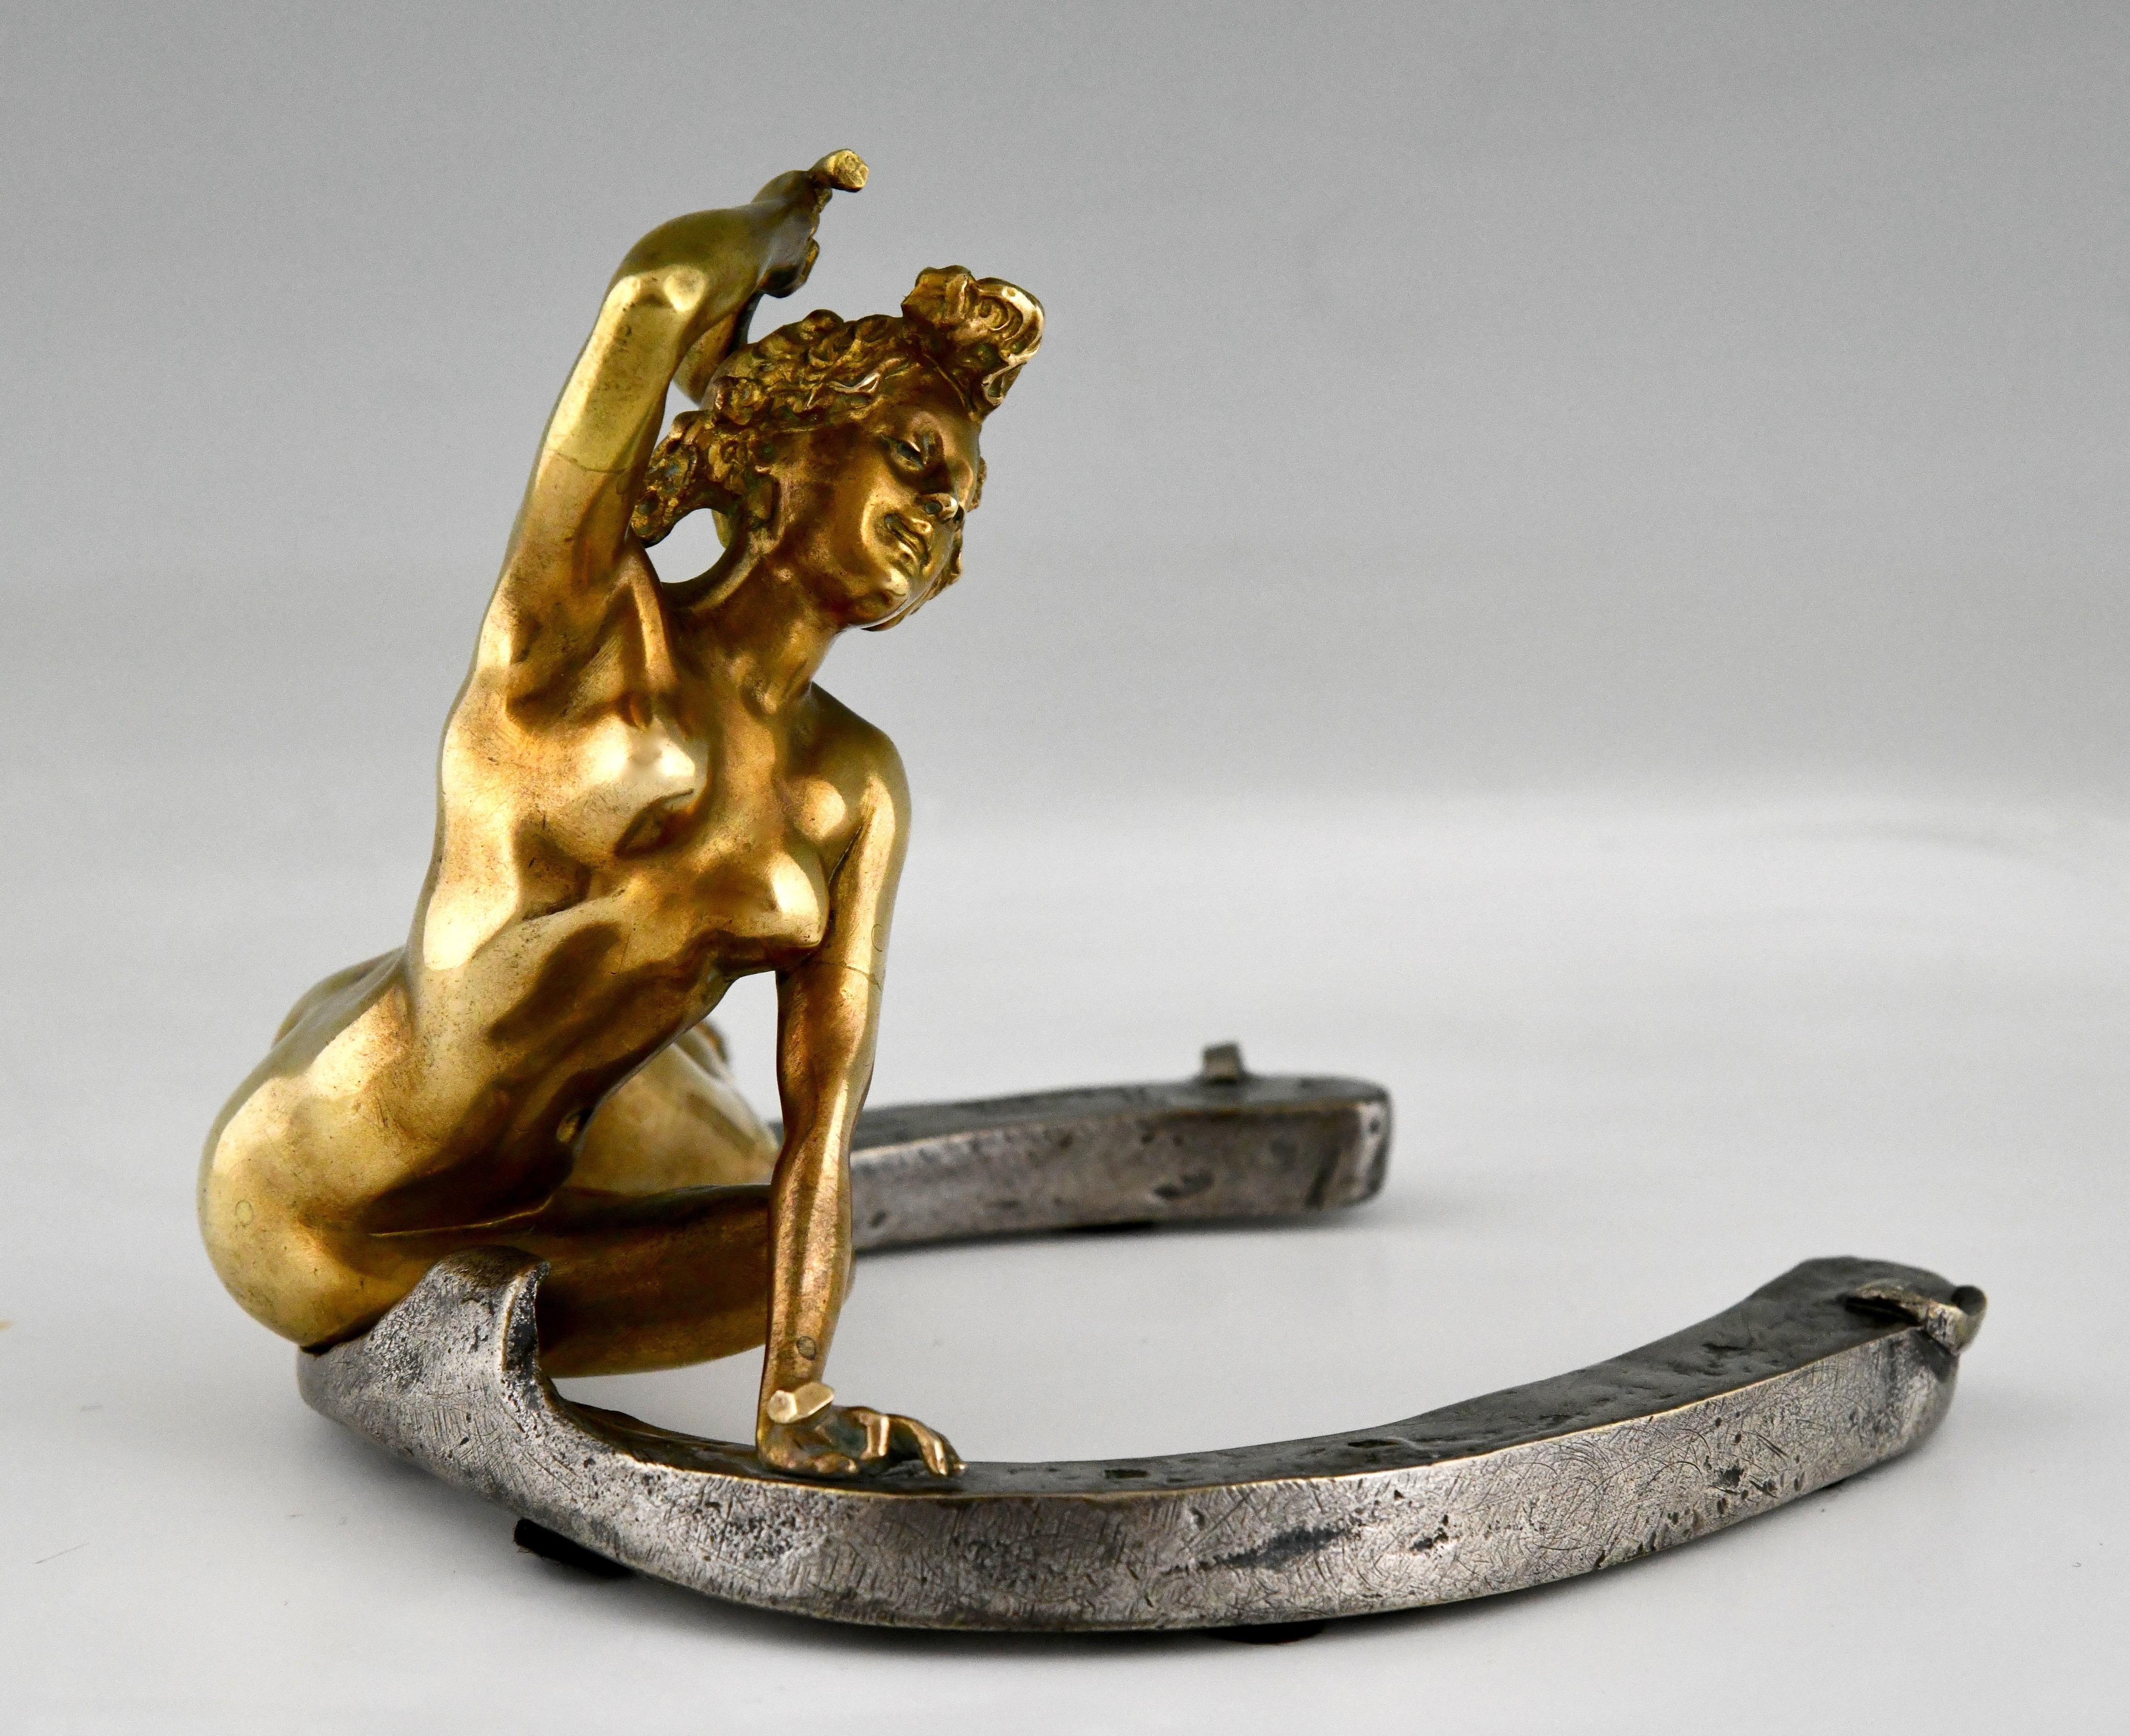 Art Nouveau bronze sculpture nude on a horseshoe by Georges Récipon, foundry mark Susse frères foundry. Gilt en patinated bronze. France 1896. This is the large version of this model.

This model is illustrated in Dynamic Beauty, Maclowe Gallery.